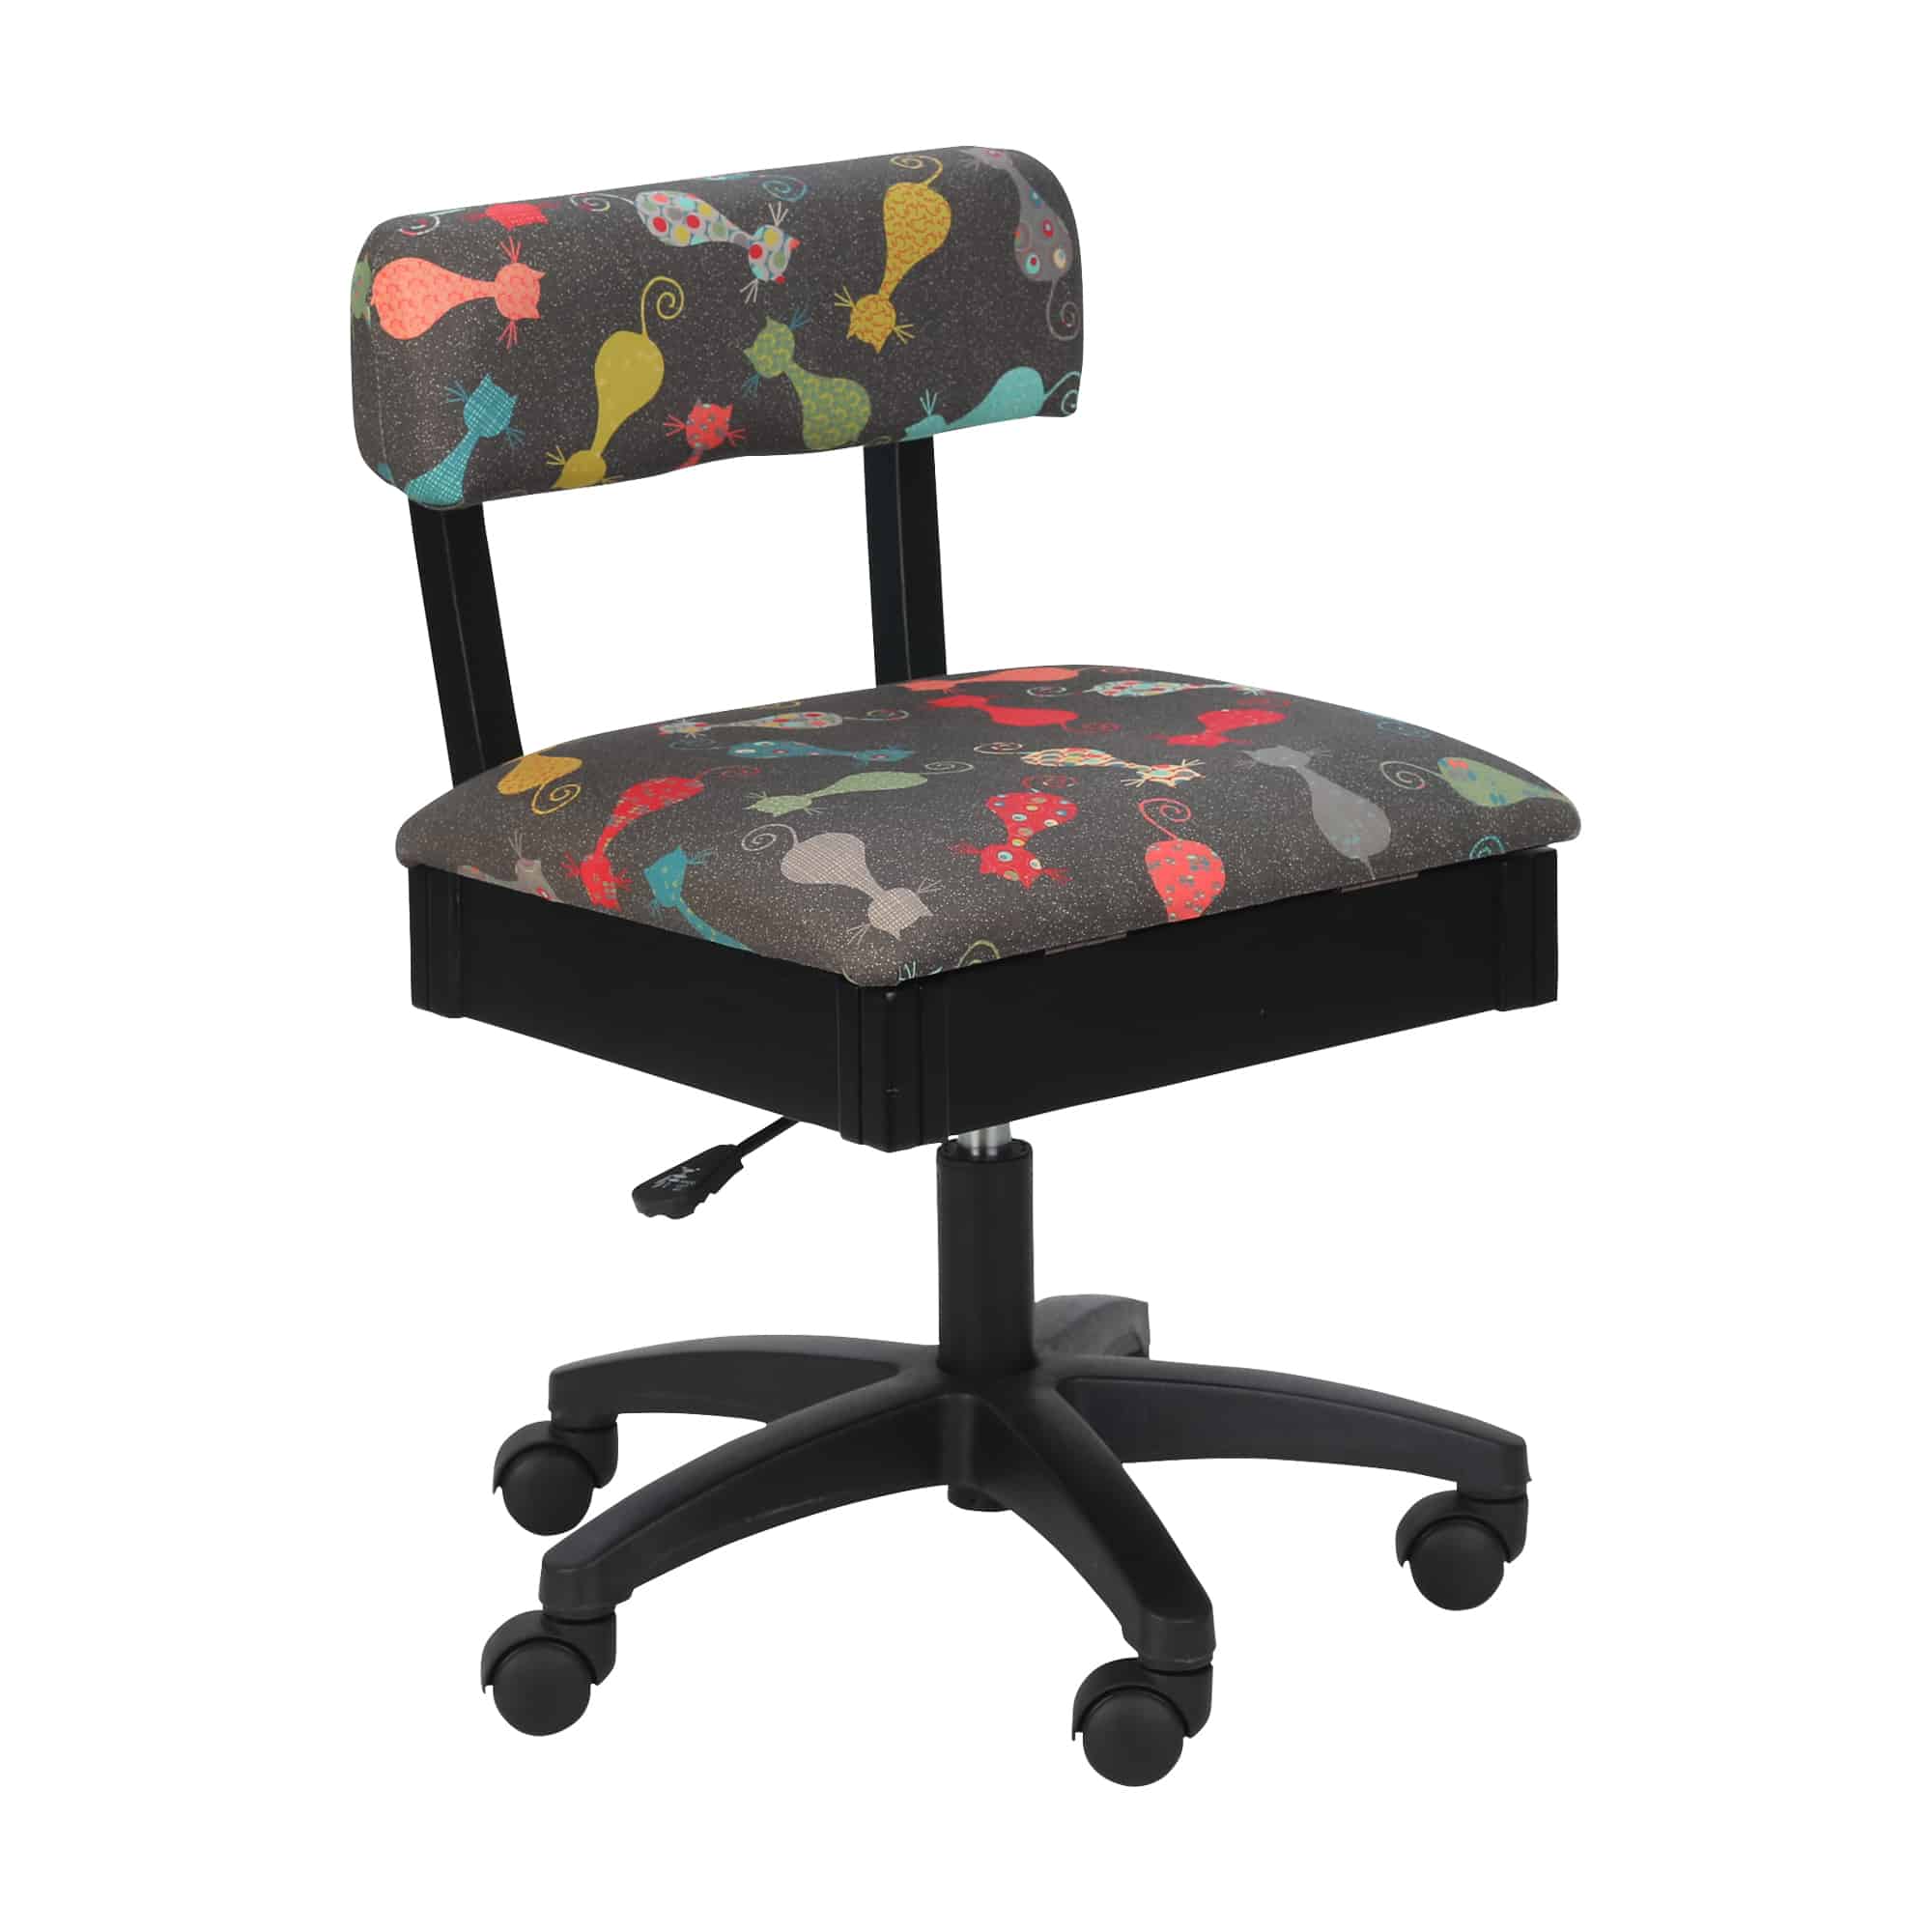 Arrow Height Adjustable Hydraulic Sewing Chair - Lady Gray